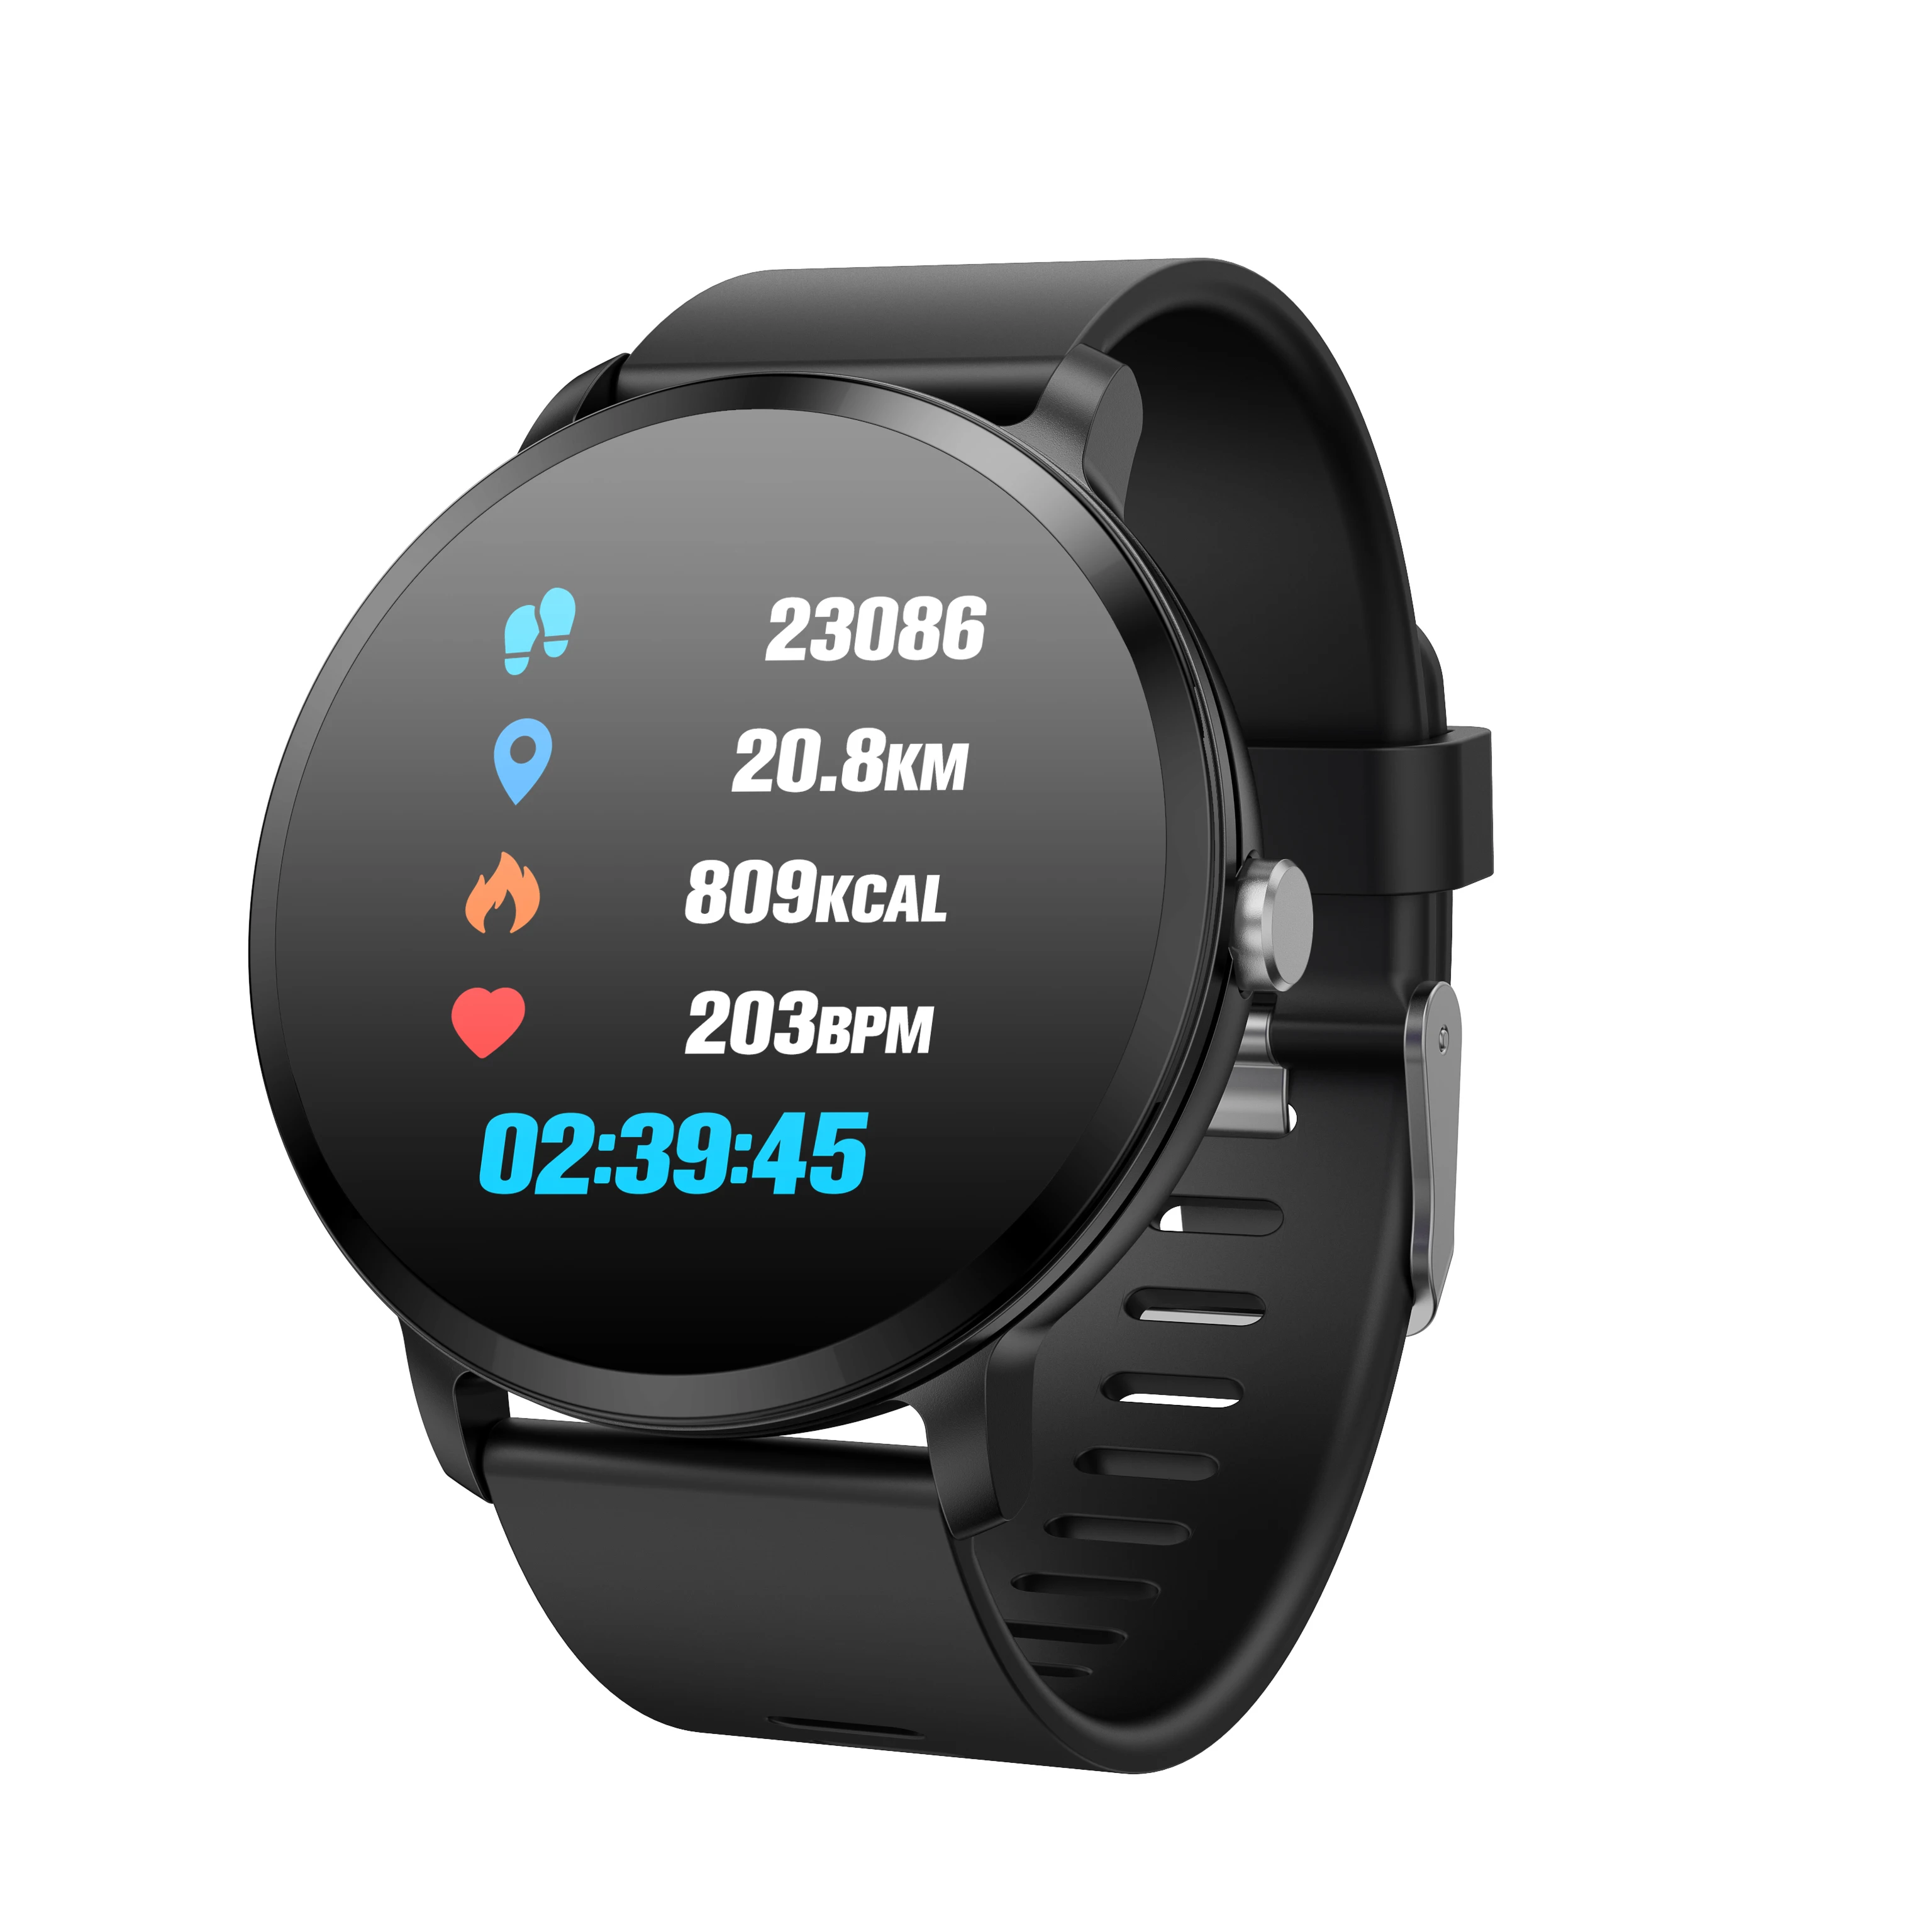 
2019 hot sale V11 big color screen sport smart watch wristband with heartrate,blood pressure function  (60824769293)